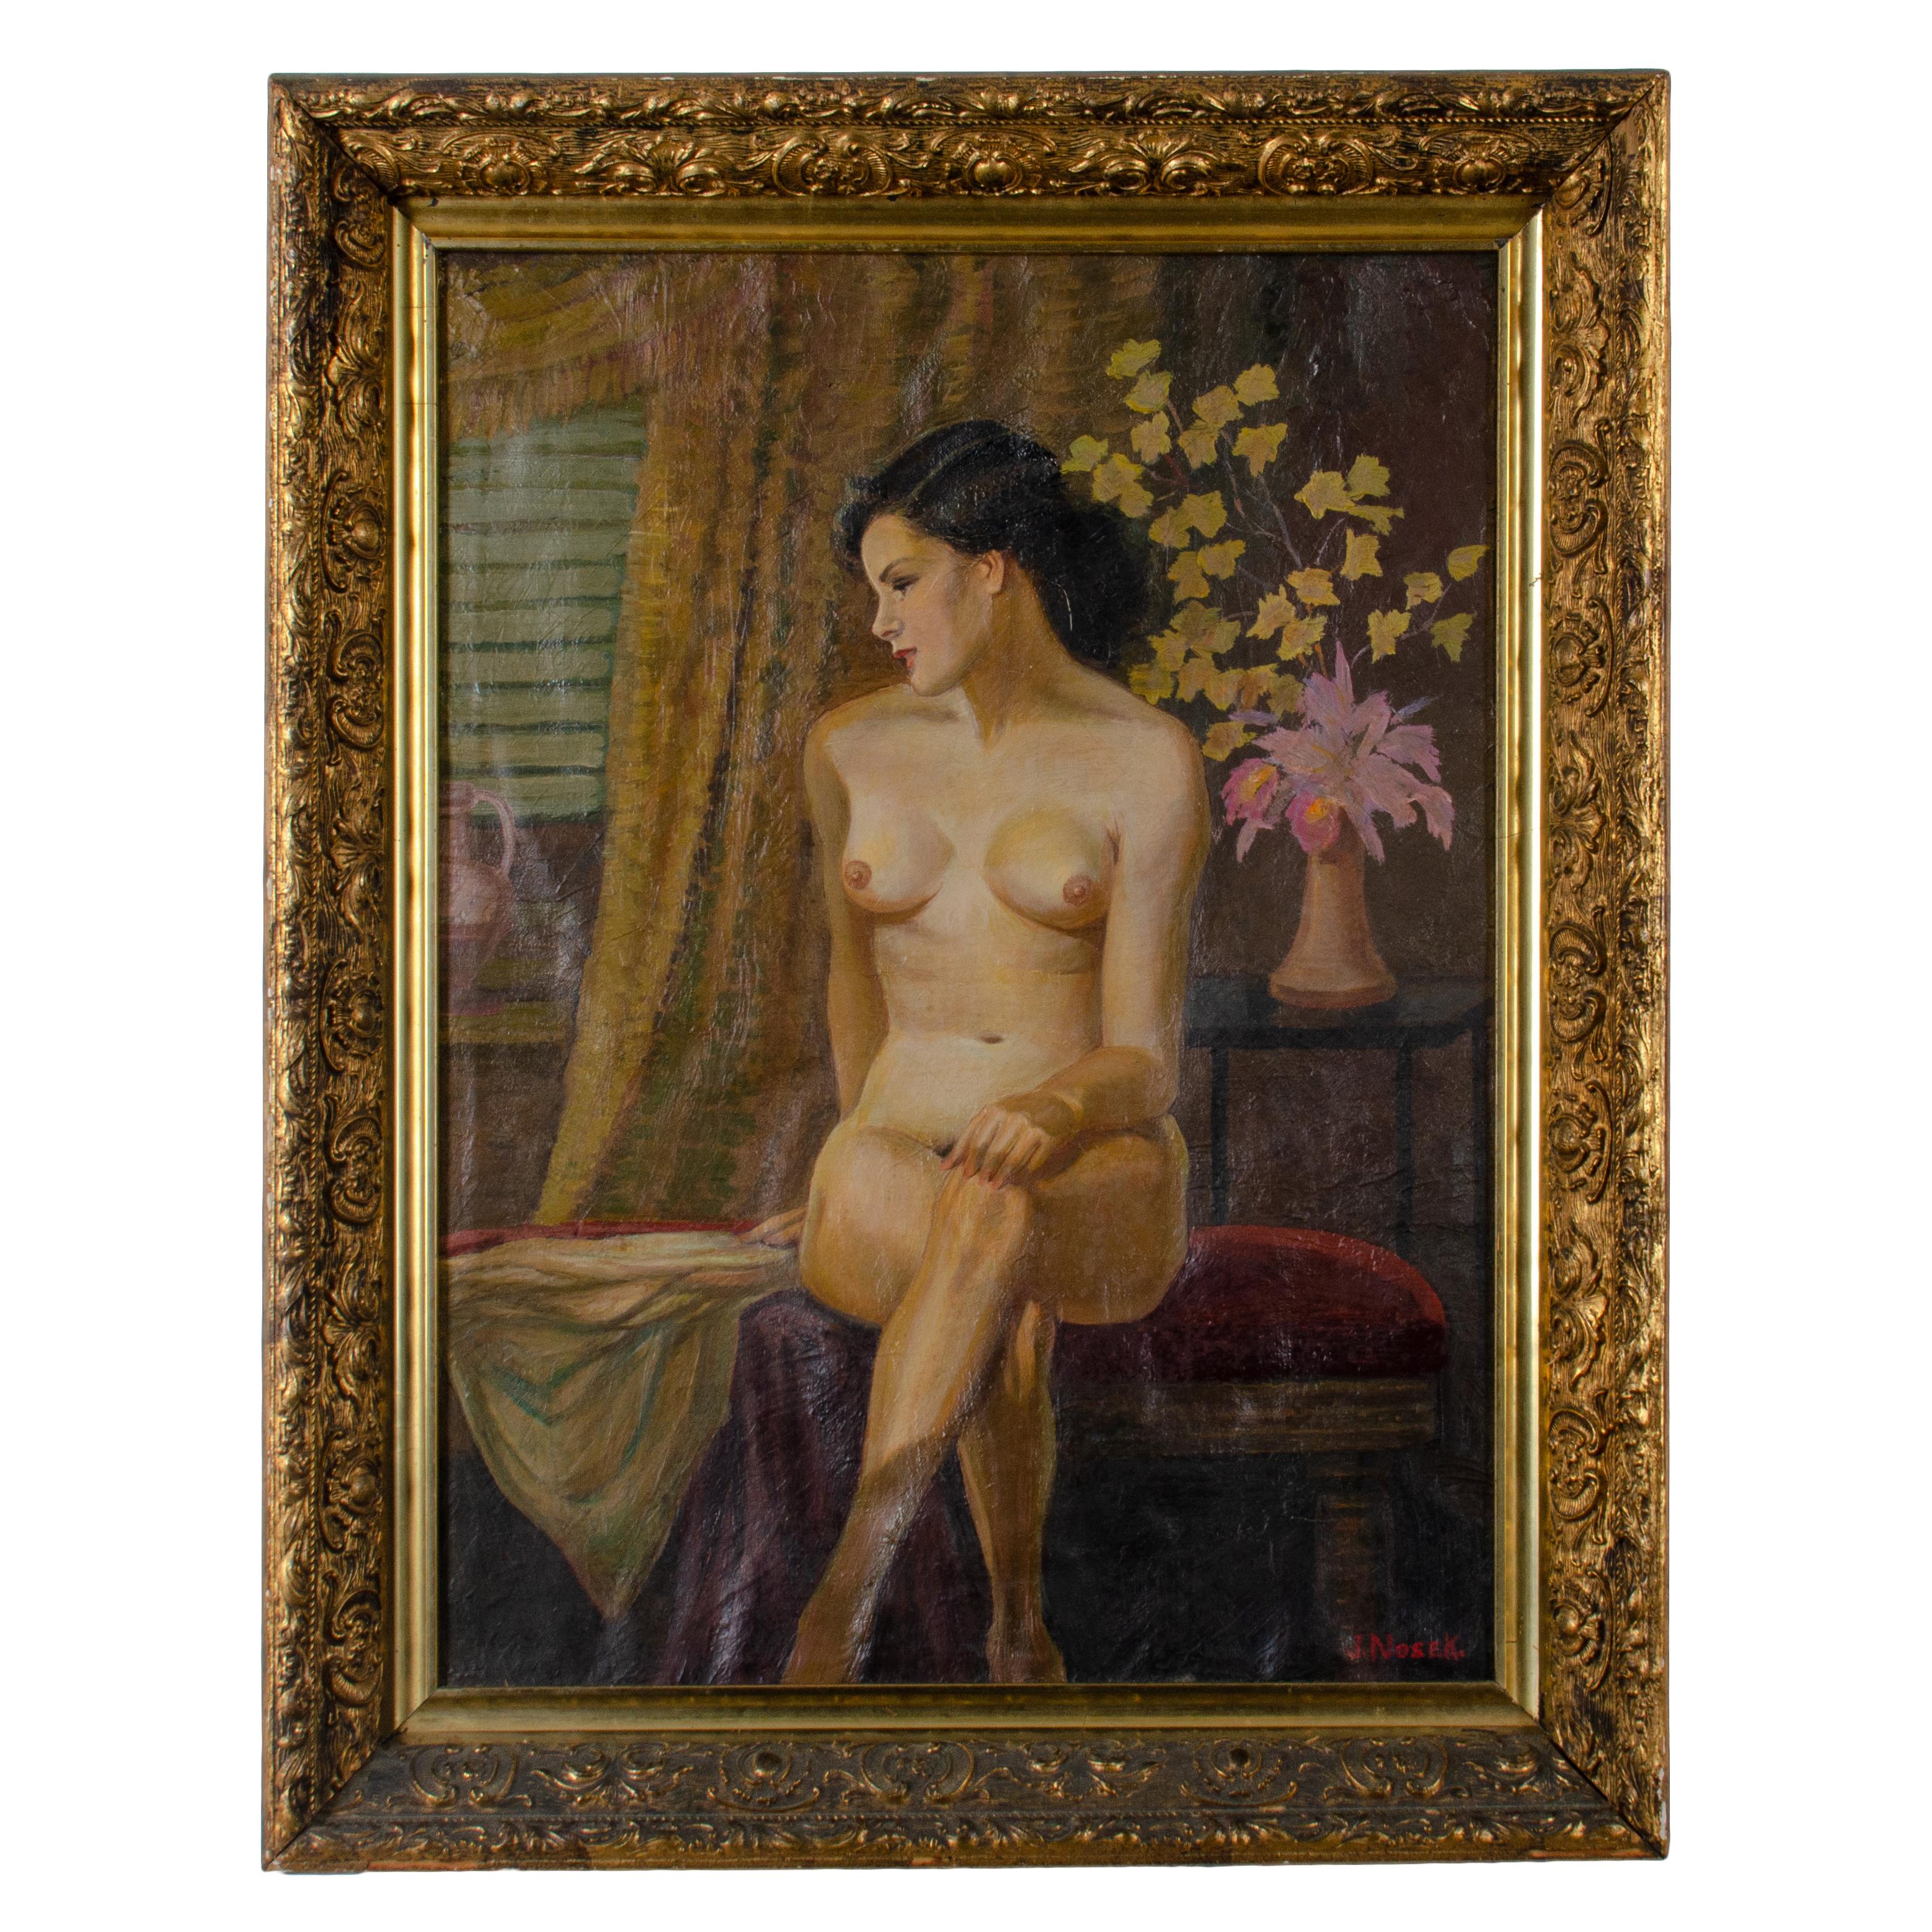 Jan Nosek
(American, 1876-1966)

Seated nude woman in an interior setting by artist and illustrator Jan Nosek.

Oil on canvas, mid 20th century
Signed lower right: J. Nosek

sight: 16 ¾ by 22 ½ inches
frame: 22 by 28 inches